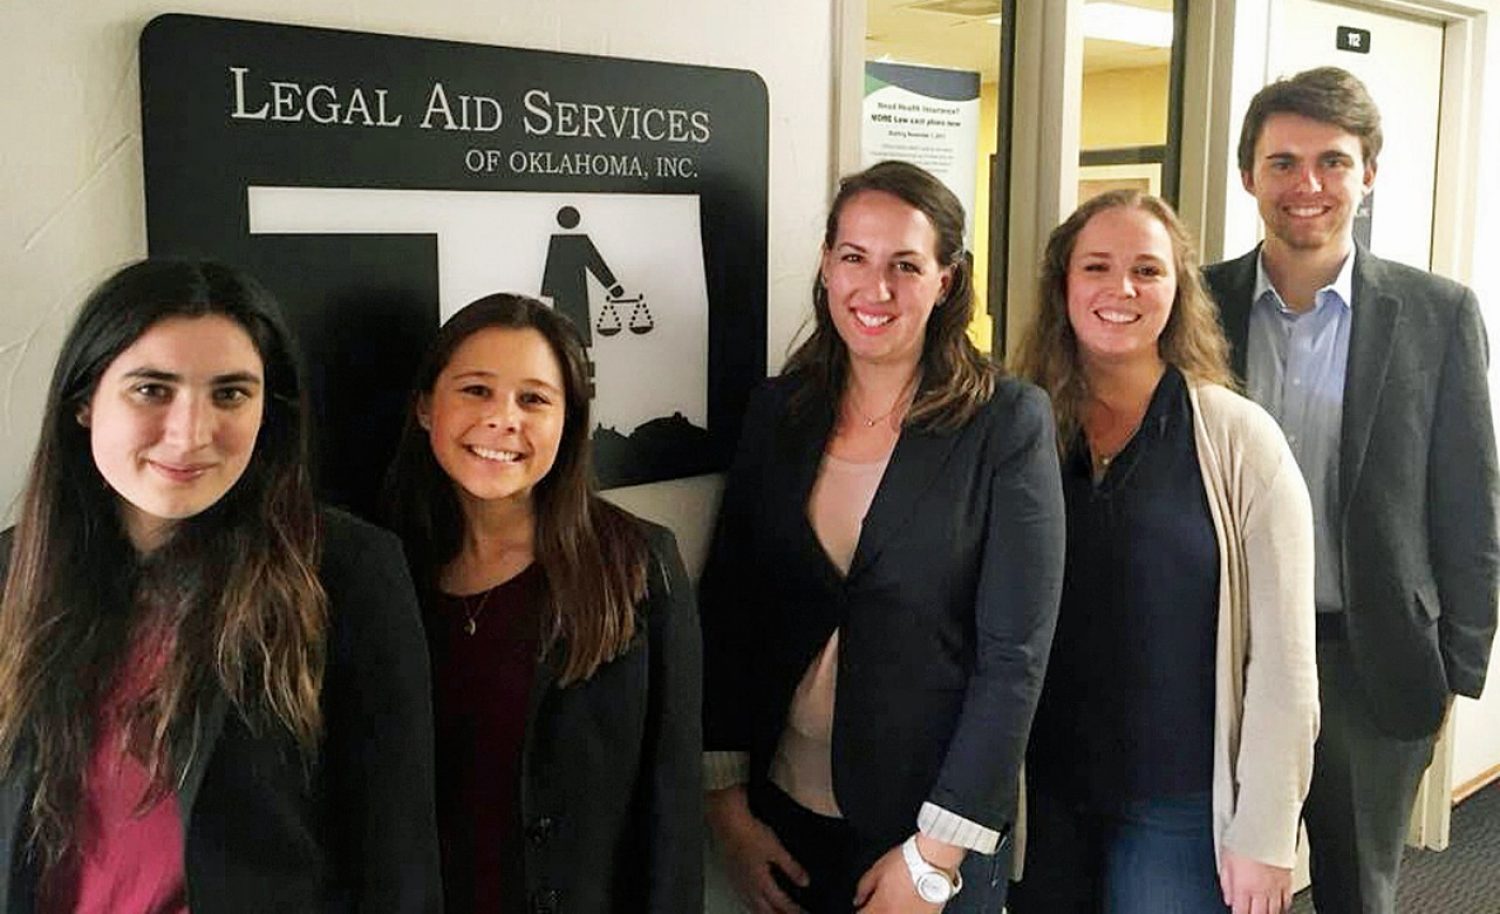 BC Law Students at Legal Aid Services